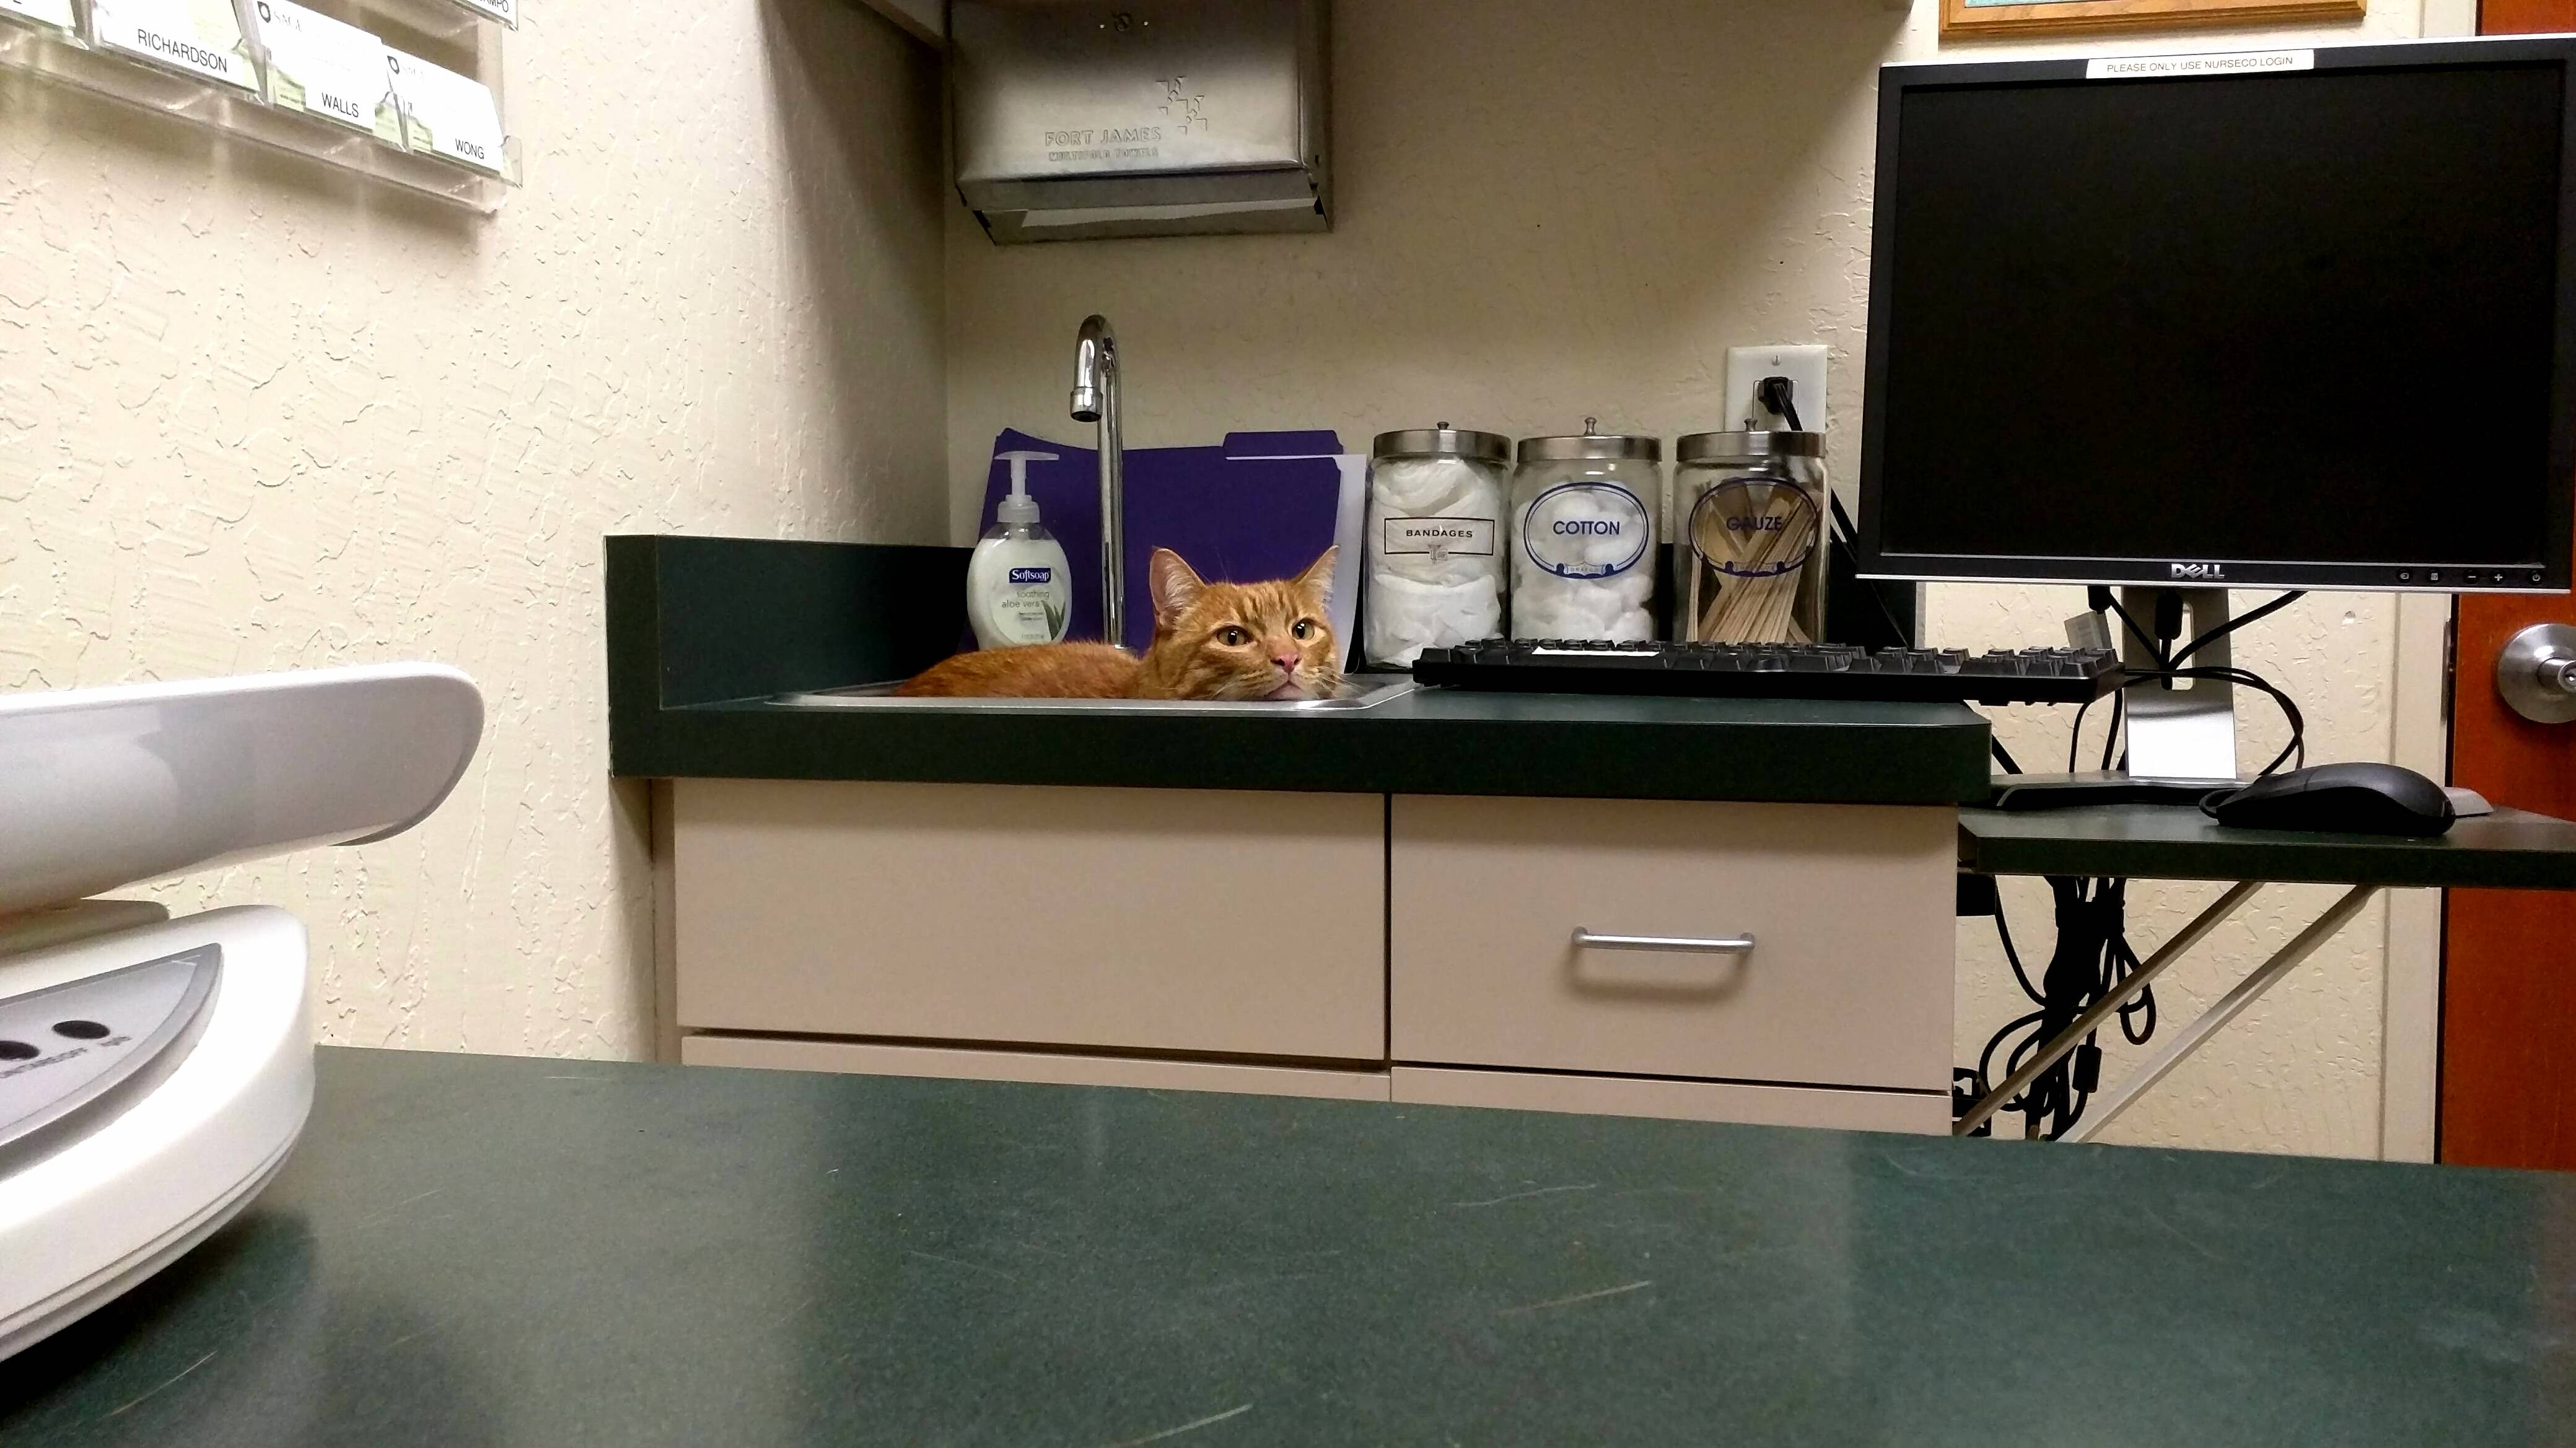 Our cat little dude contemplating his first trip to the vet